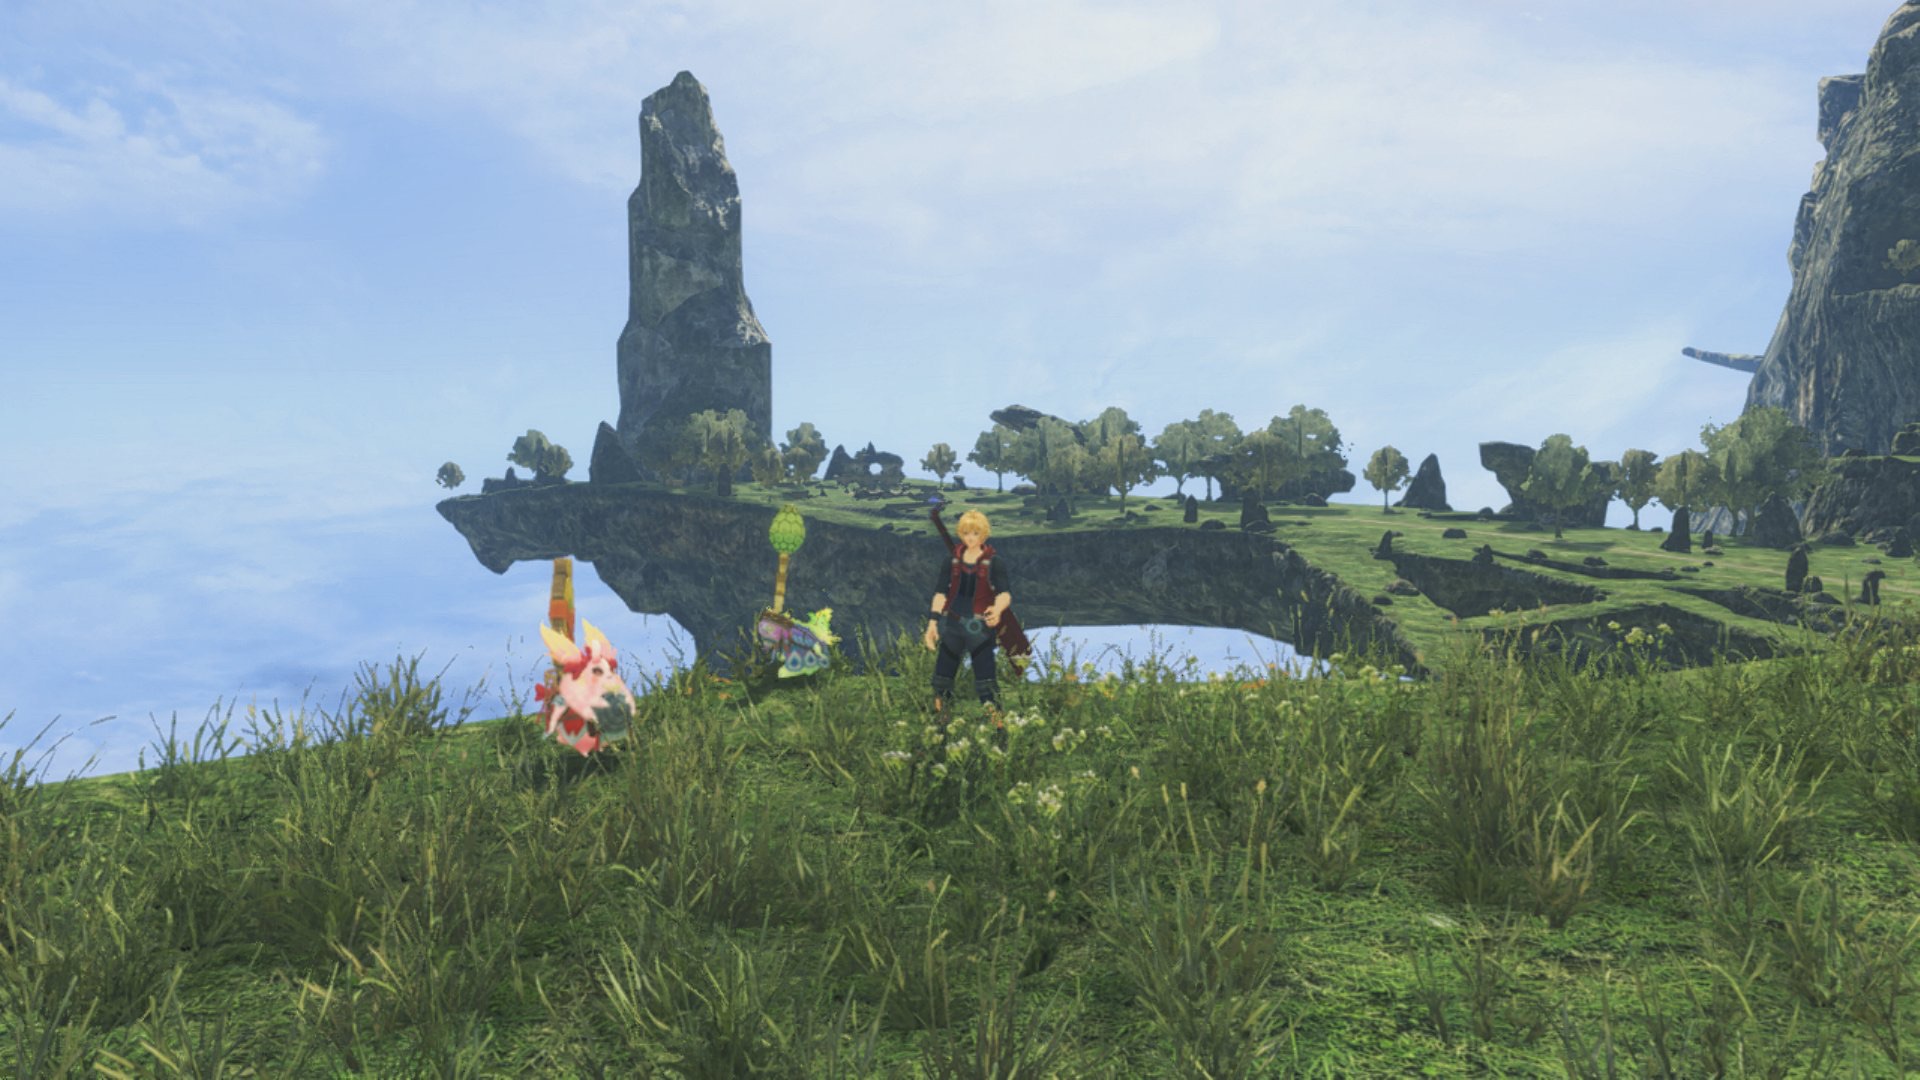 Xenoblade Chronicles: Definitive Edition - Future Connected screenshots